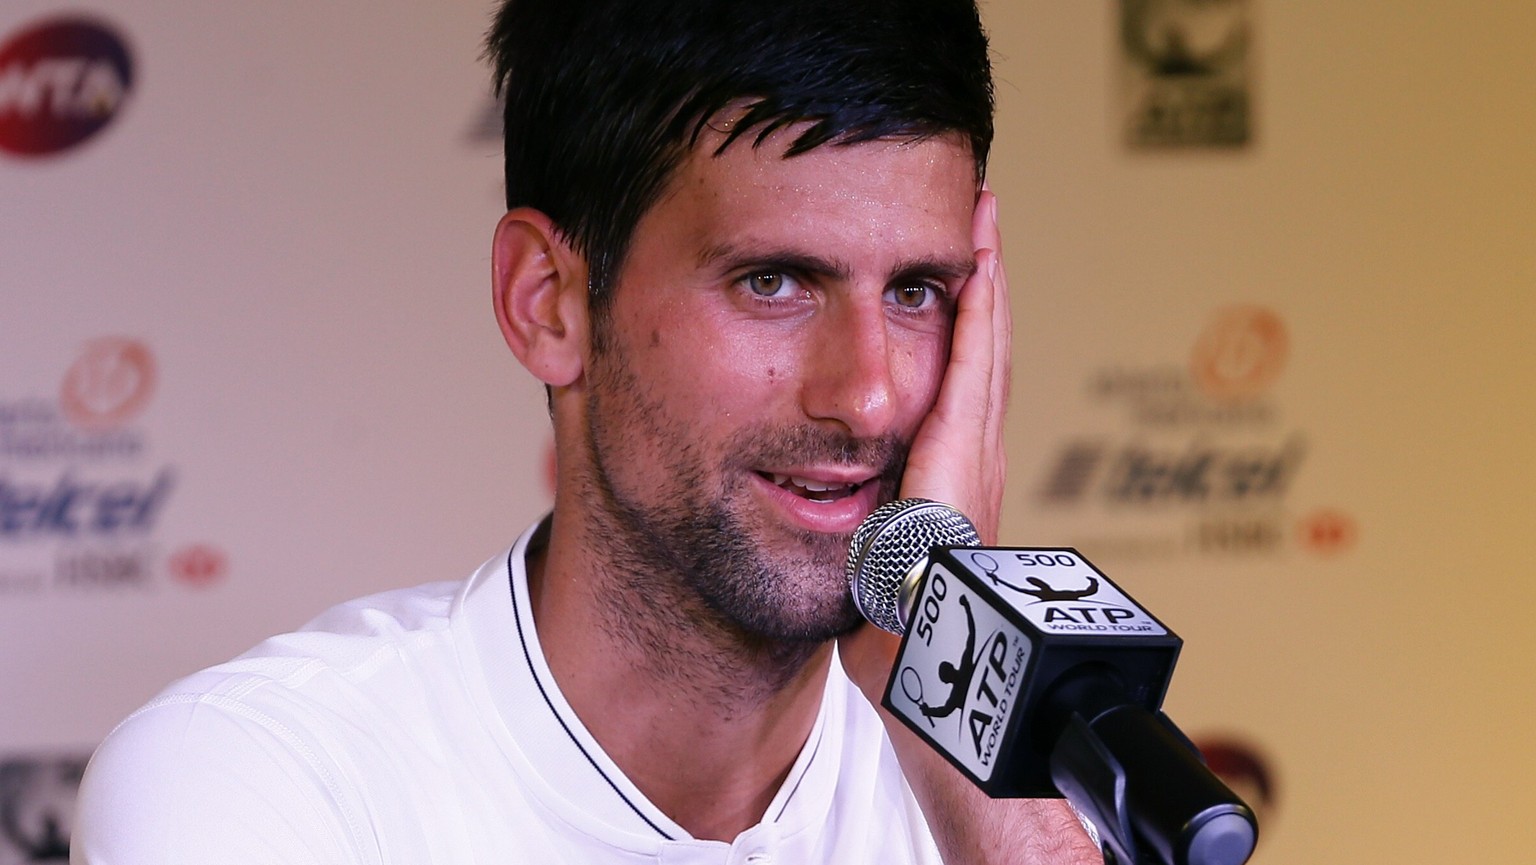 epa05819655 Serbian tennis player Novak Djokovic speaks during a press conference about his participation in the Mexican Tennis Open, in Acapulco, Mexico, 27 February 2017. EPA/José Méndez .